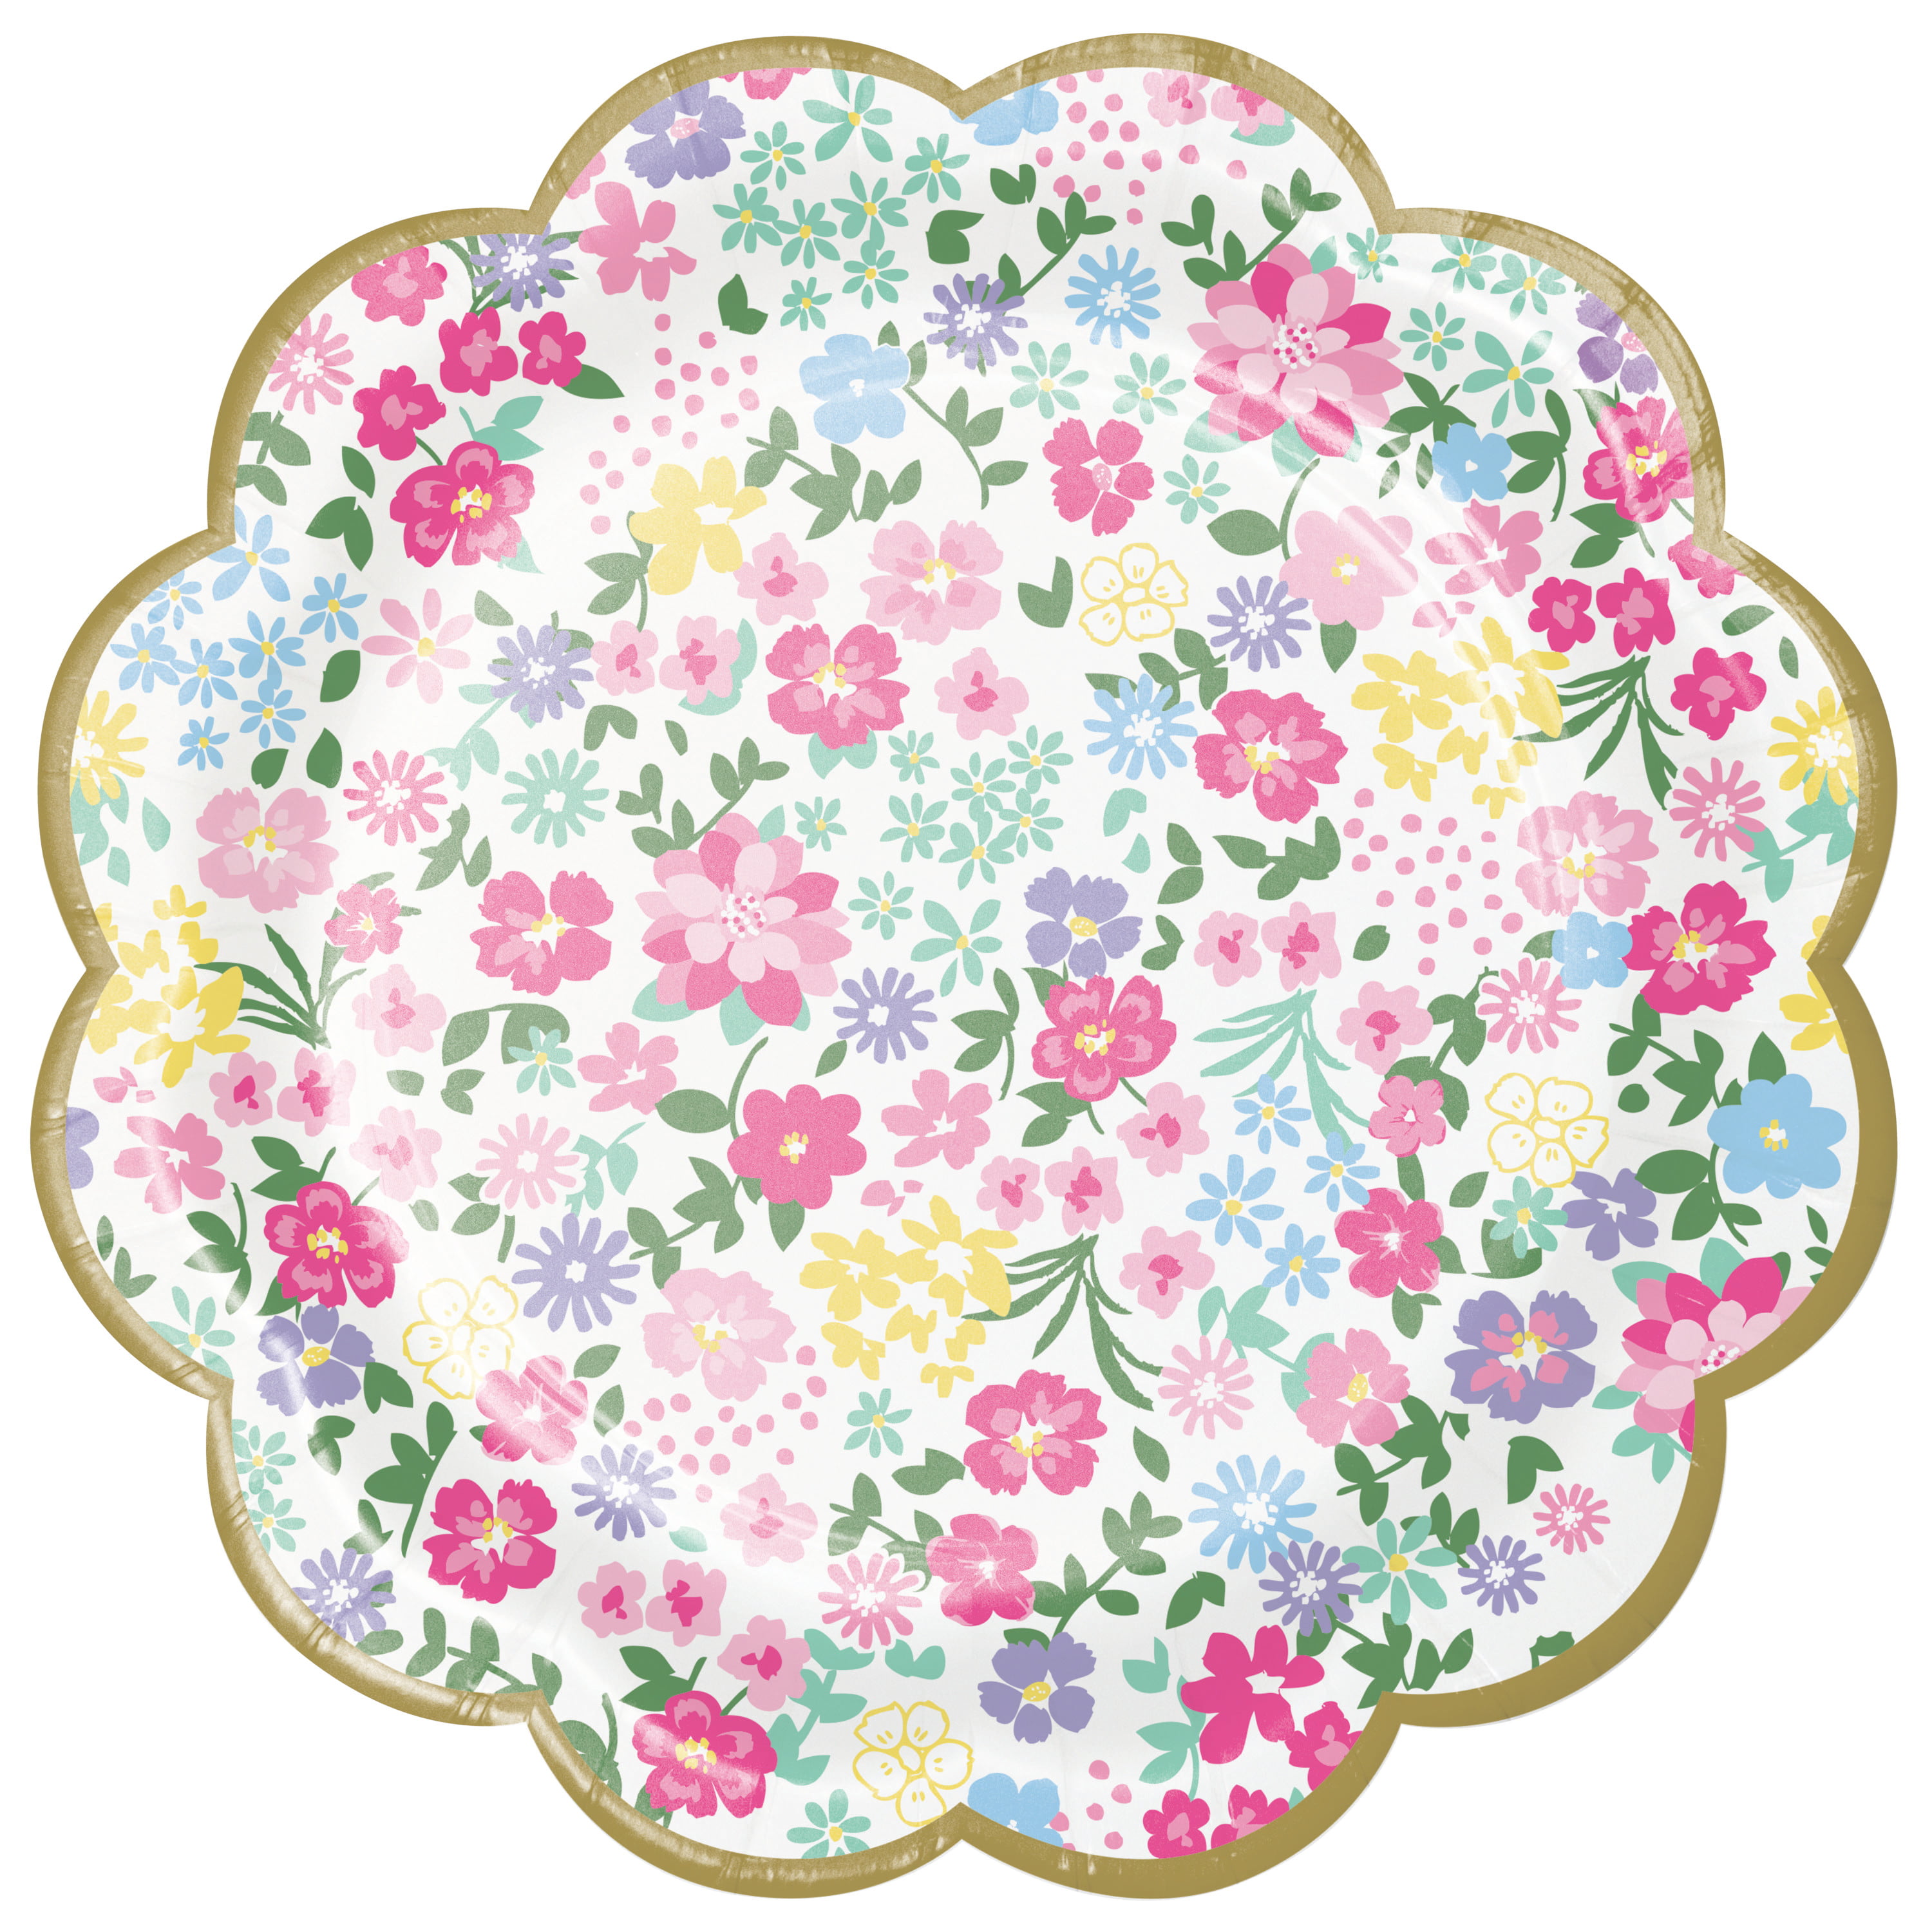 Party Creations Sturdy Style Plates, Floral Tea Party 339796 - 8 plates